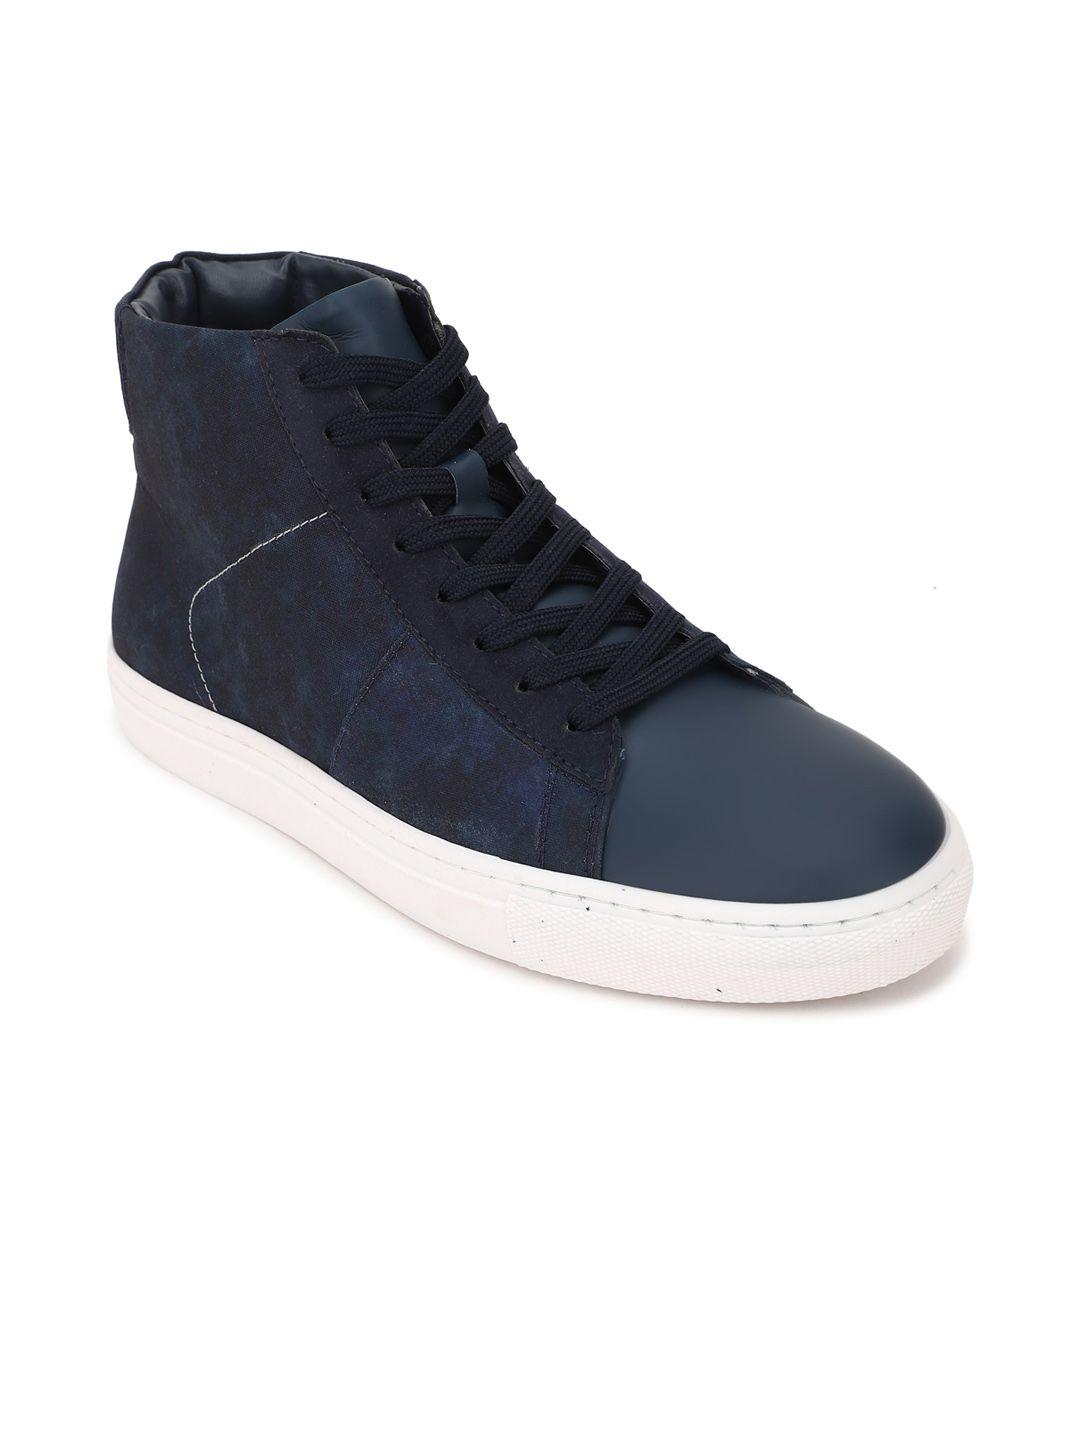 forever 21 women navy blue textured sneakers